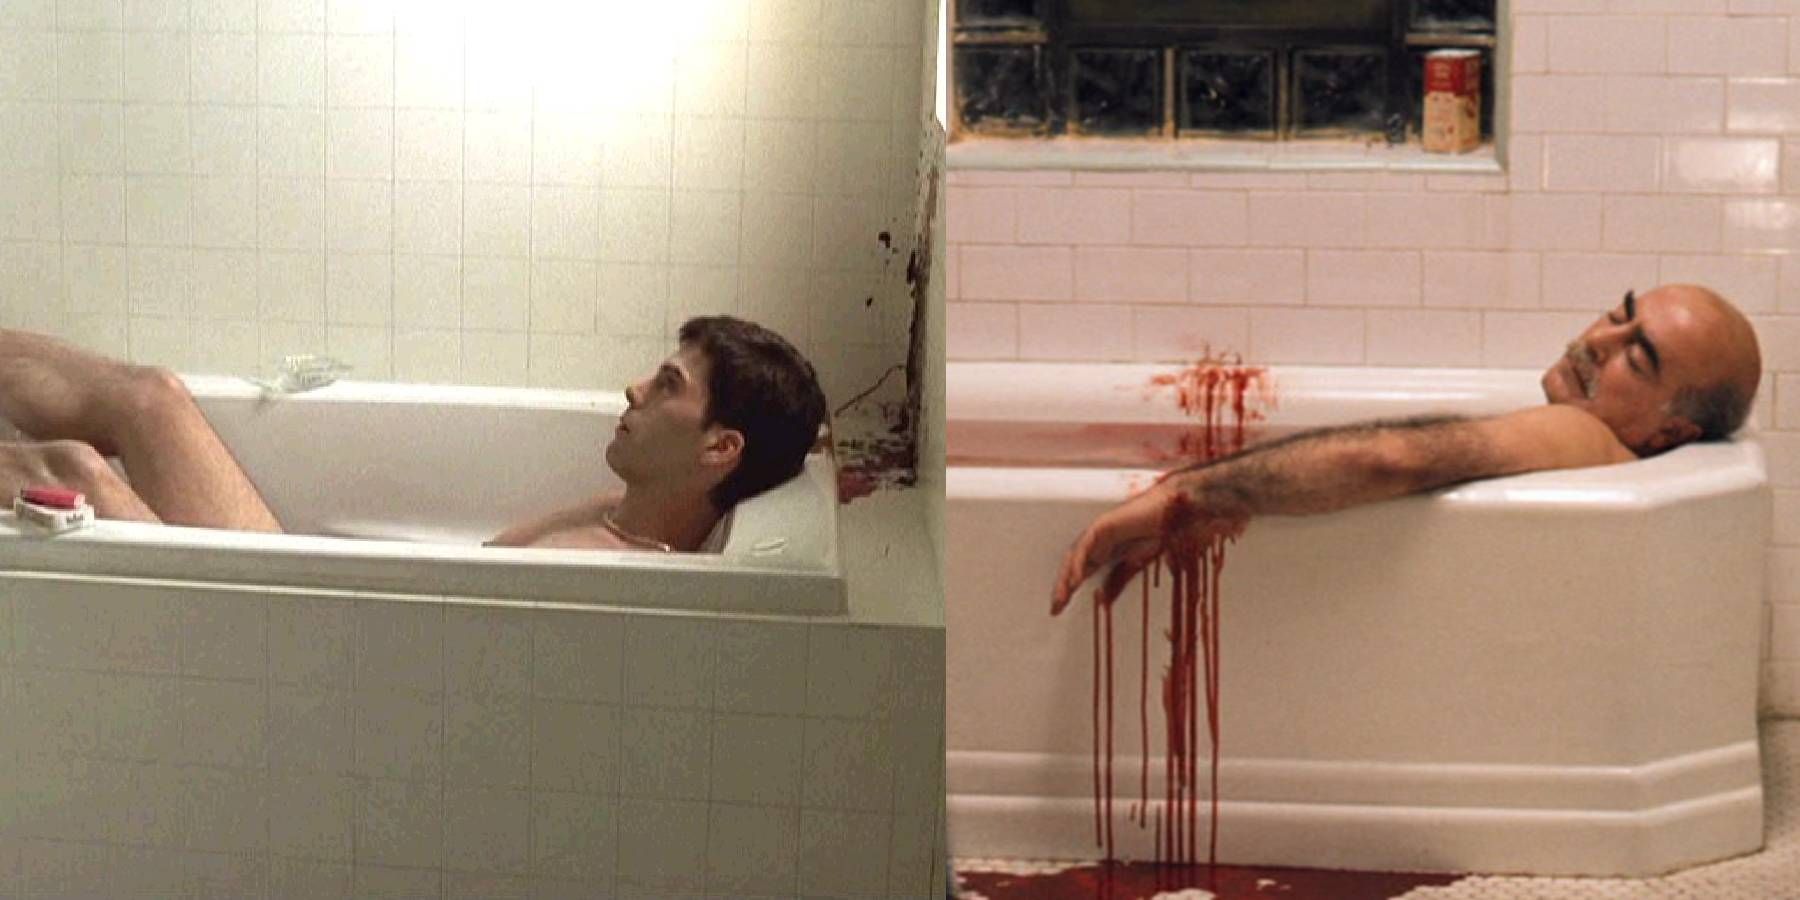 Brendan Filone and Frank Pentangeli shot in the bath in The Sopranos and The Godfather